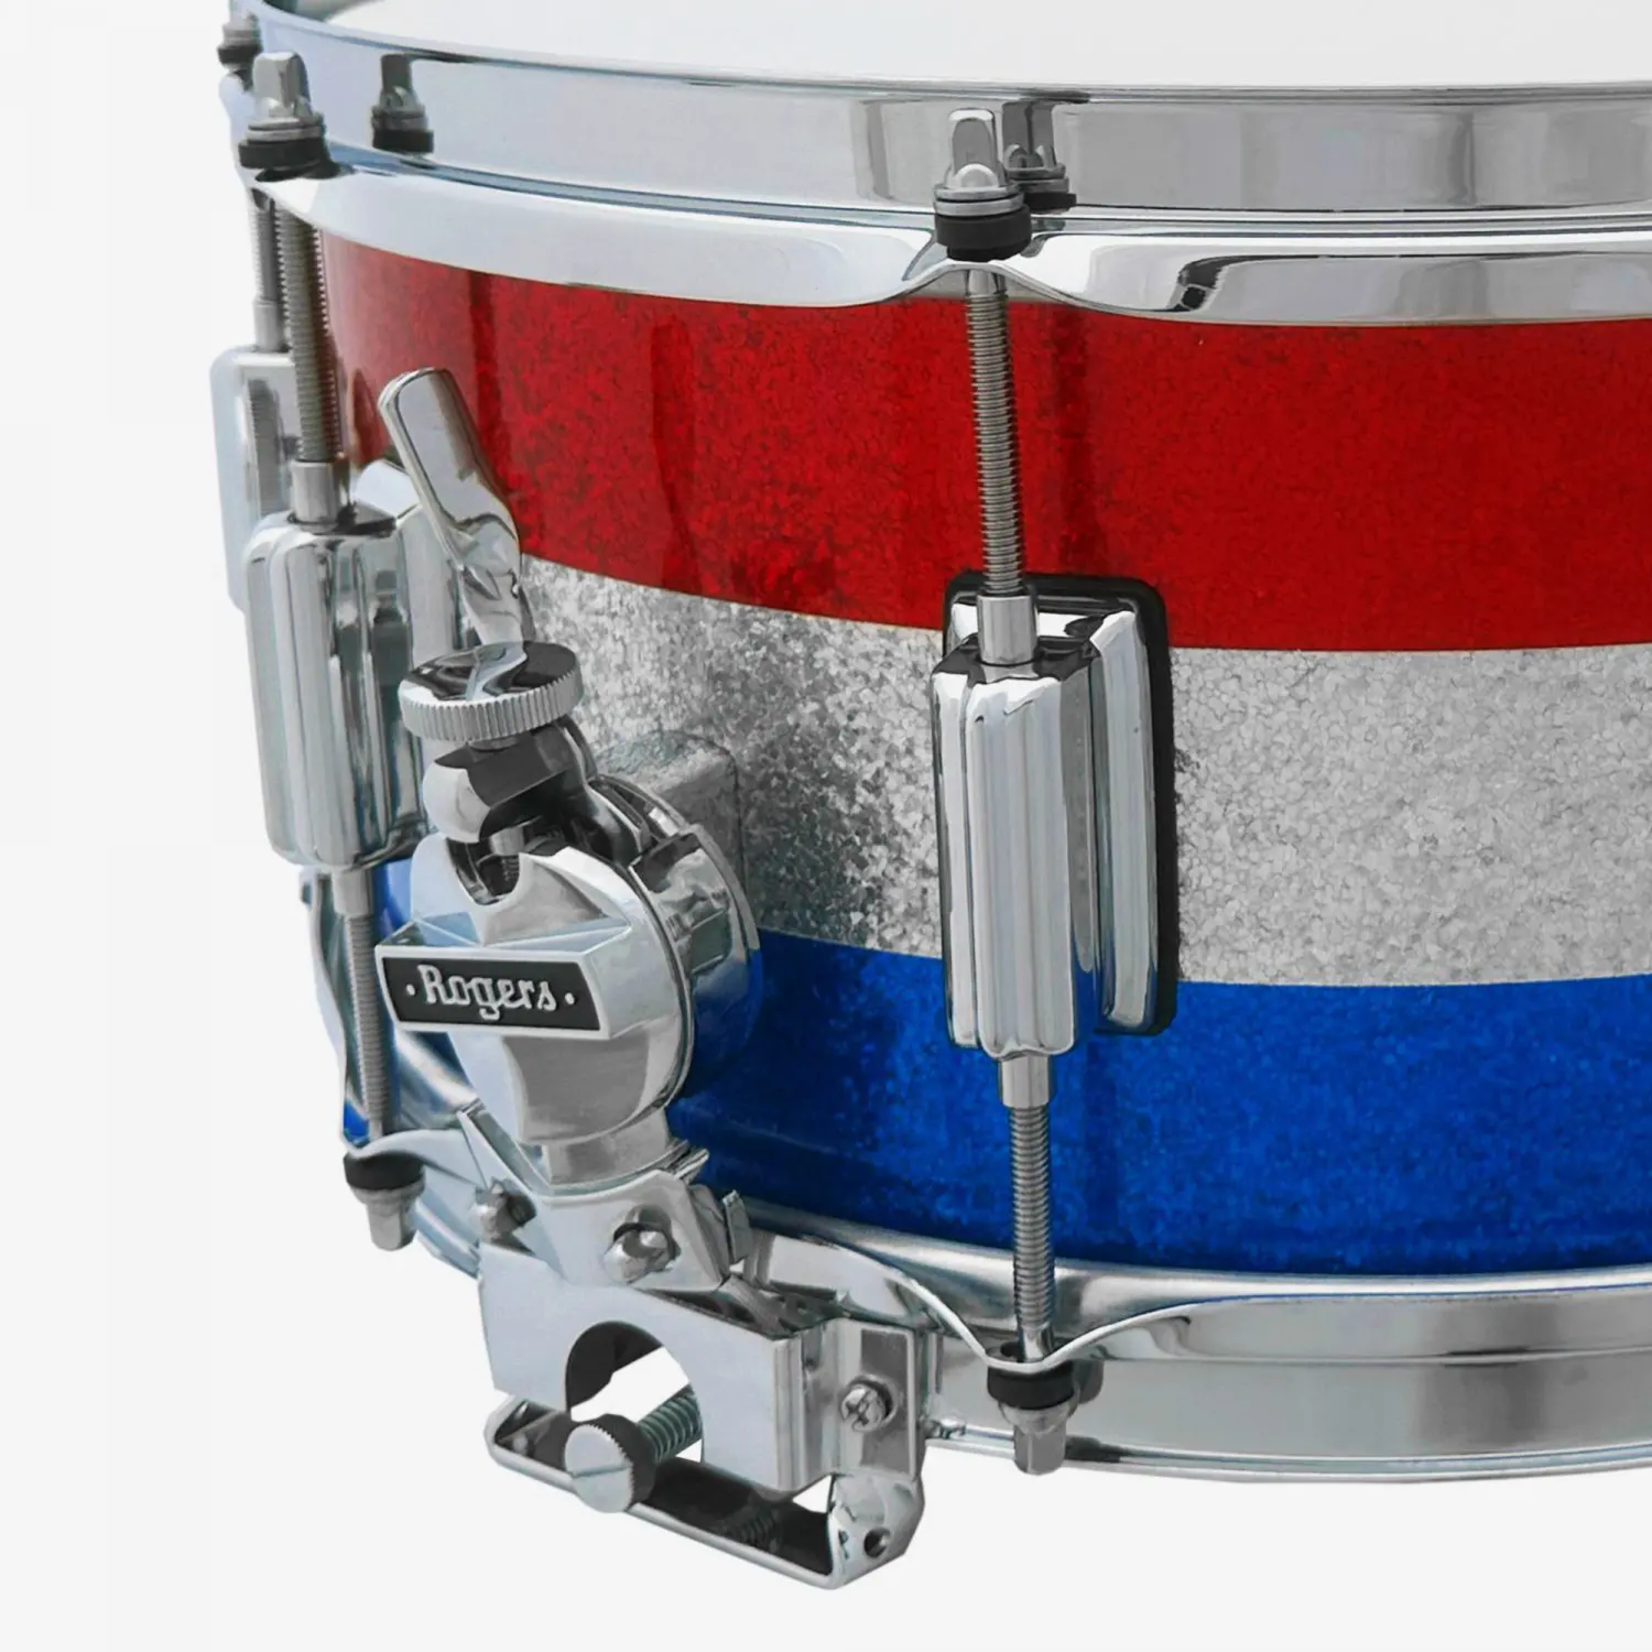 Rogers Rogers 6.5x14" Dyna-Sonic Snare Drum (Red, White, and Blue Sparkle) 37RWB